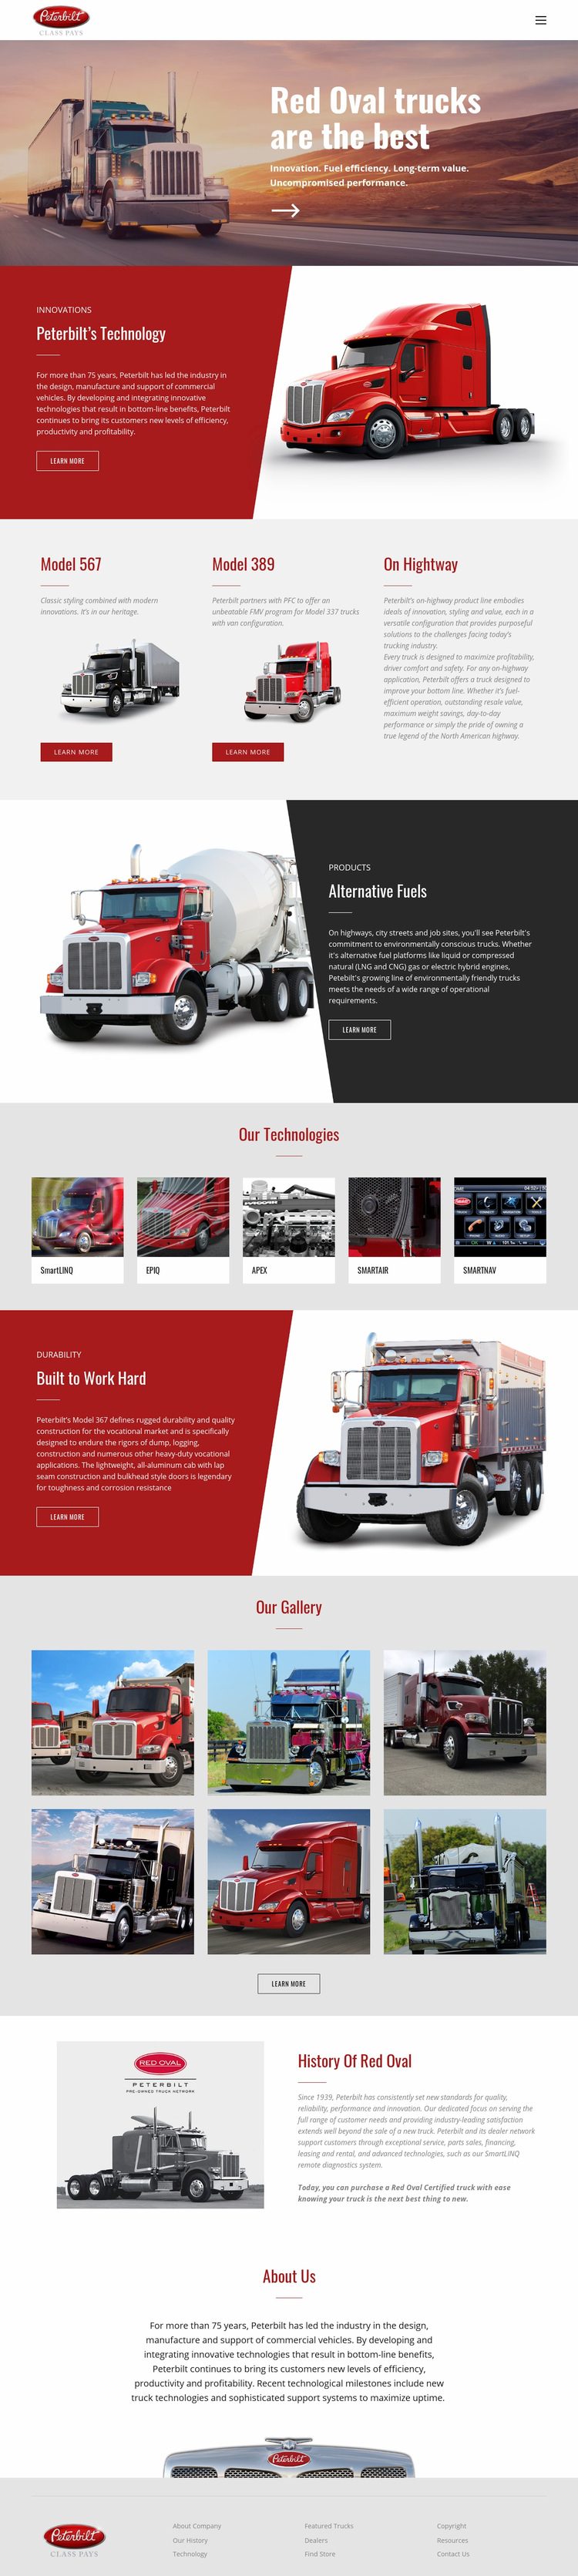 Red oval truck transportaion Squarespace Template Alternative